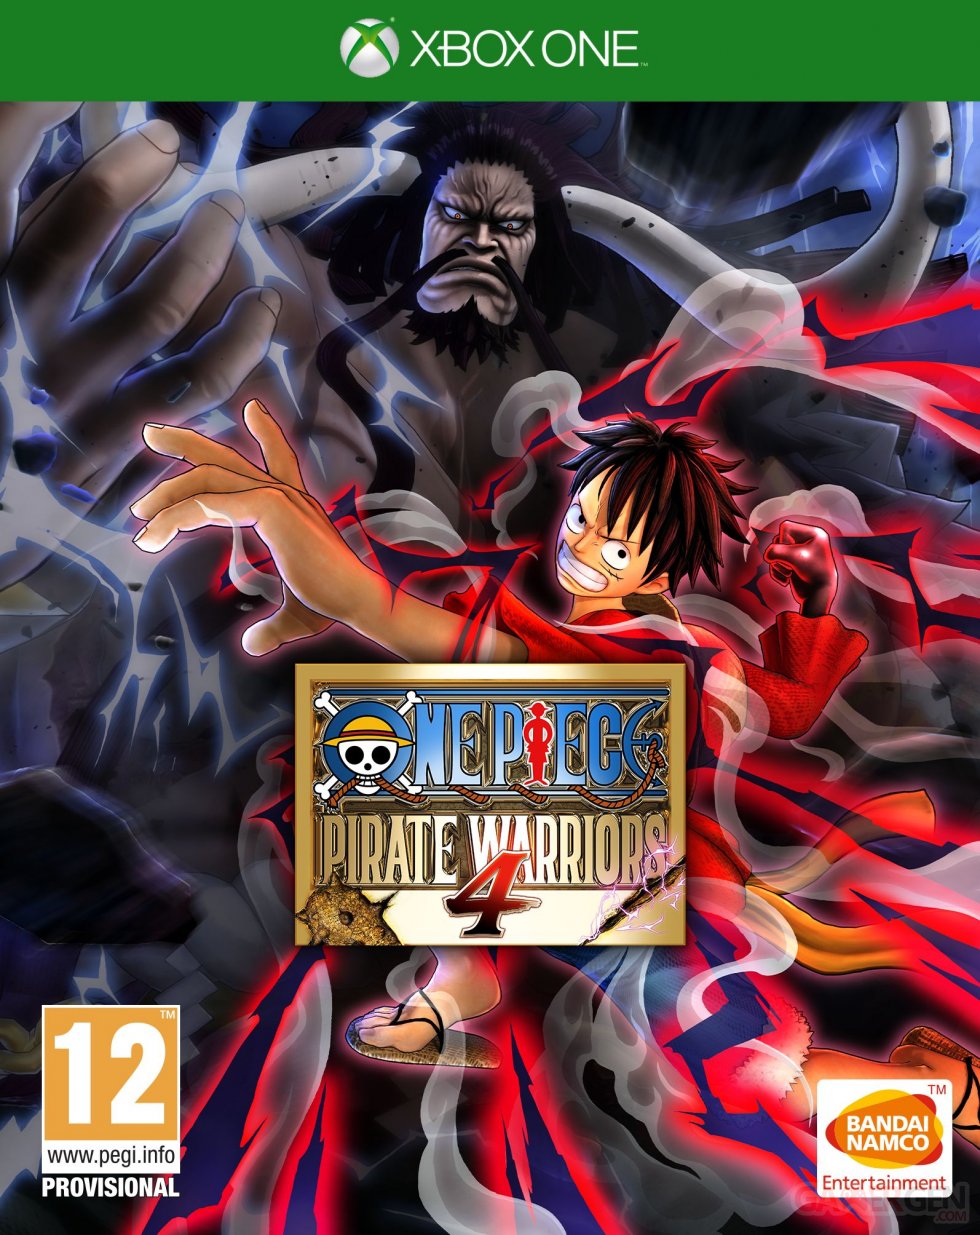 One-Piece-Pirate-Warriors-4-jaquette-Xbox-One-25-11-2019